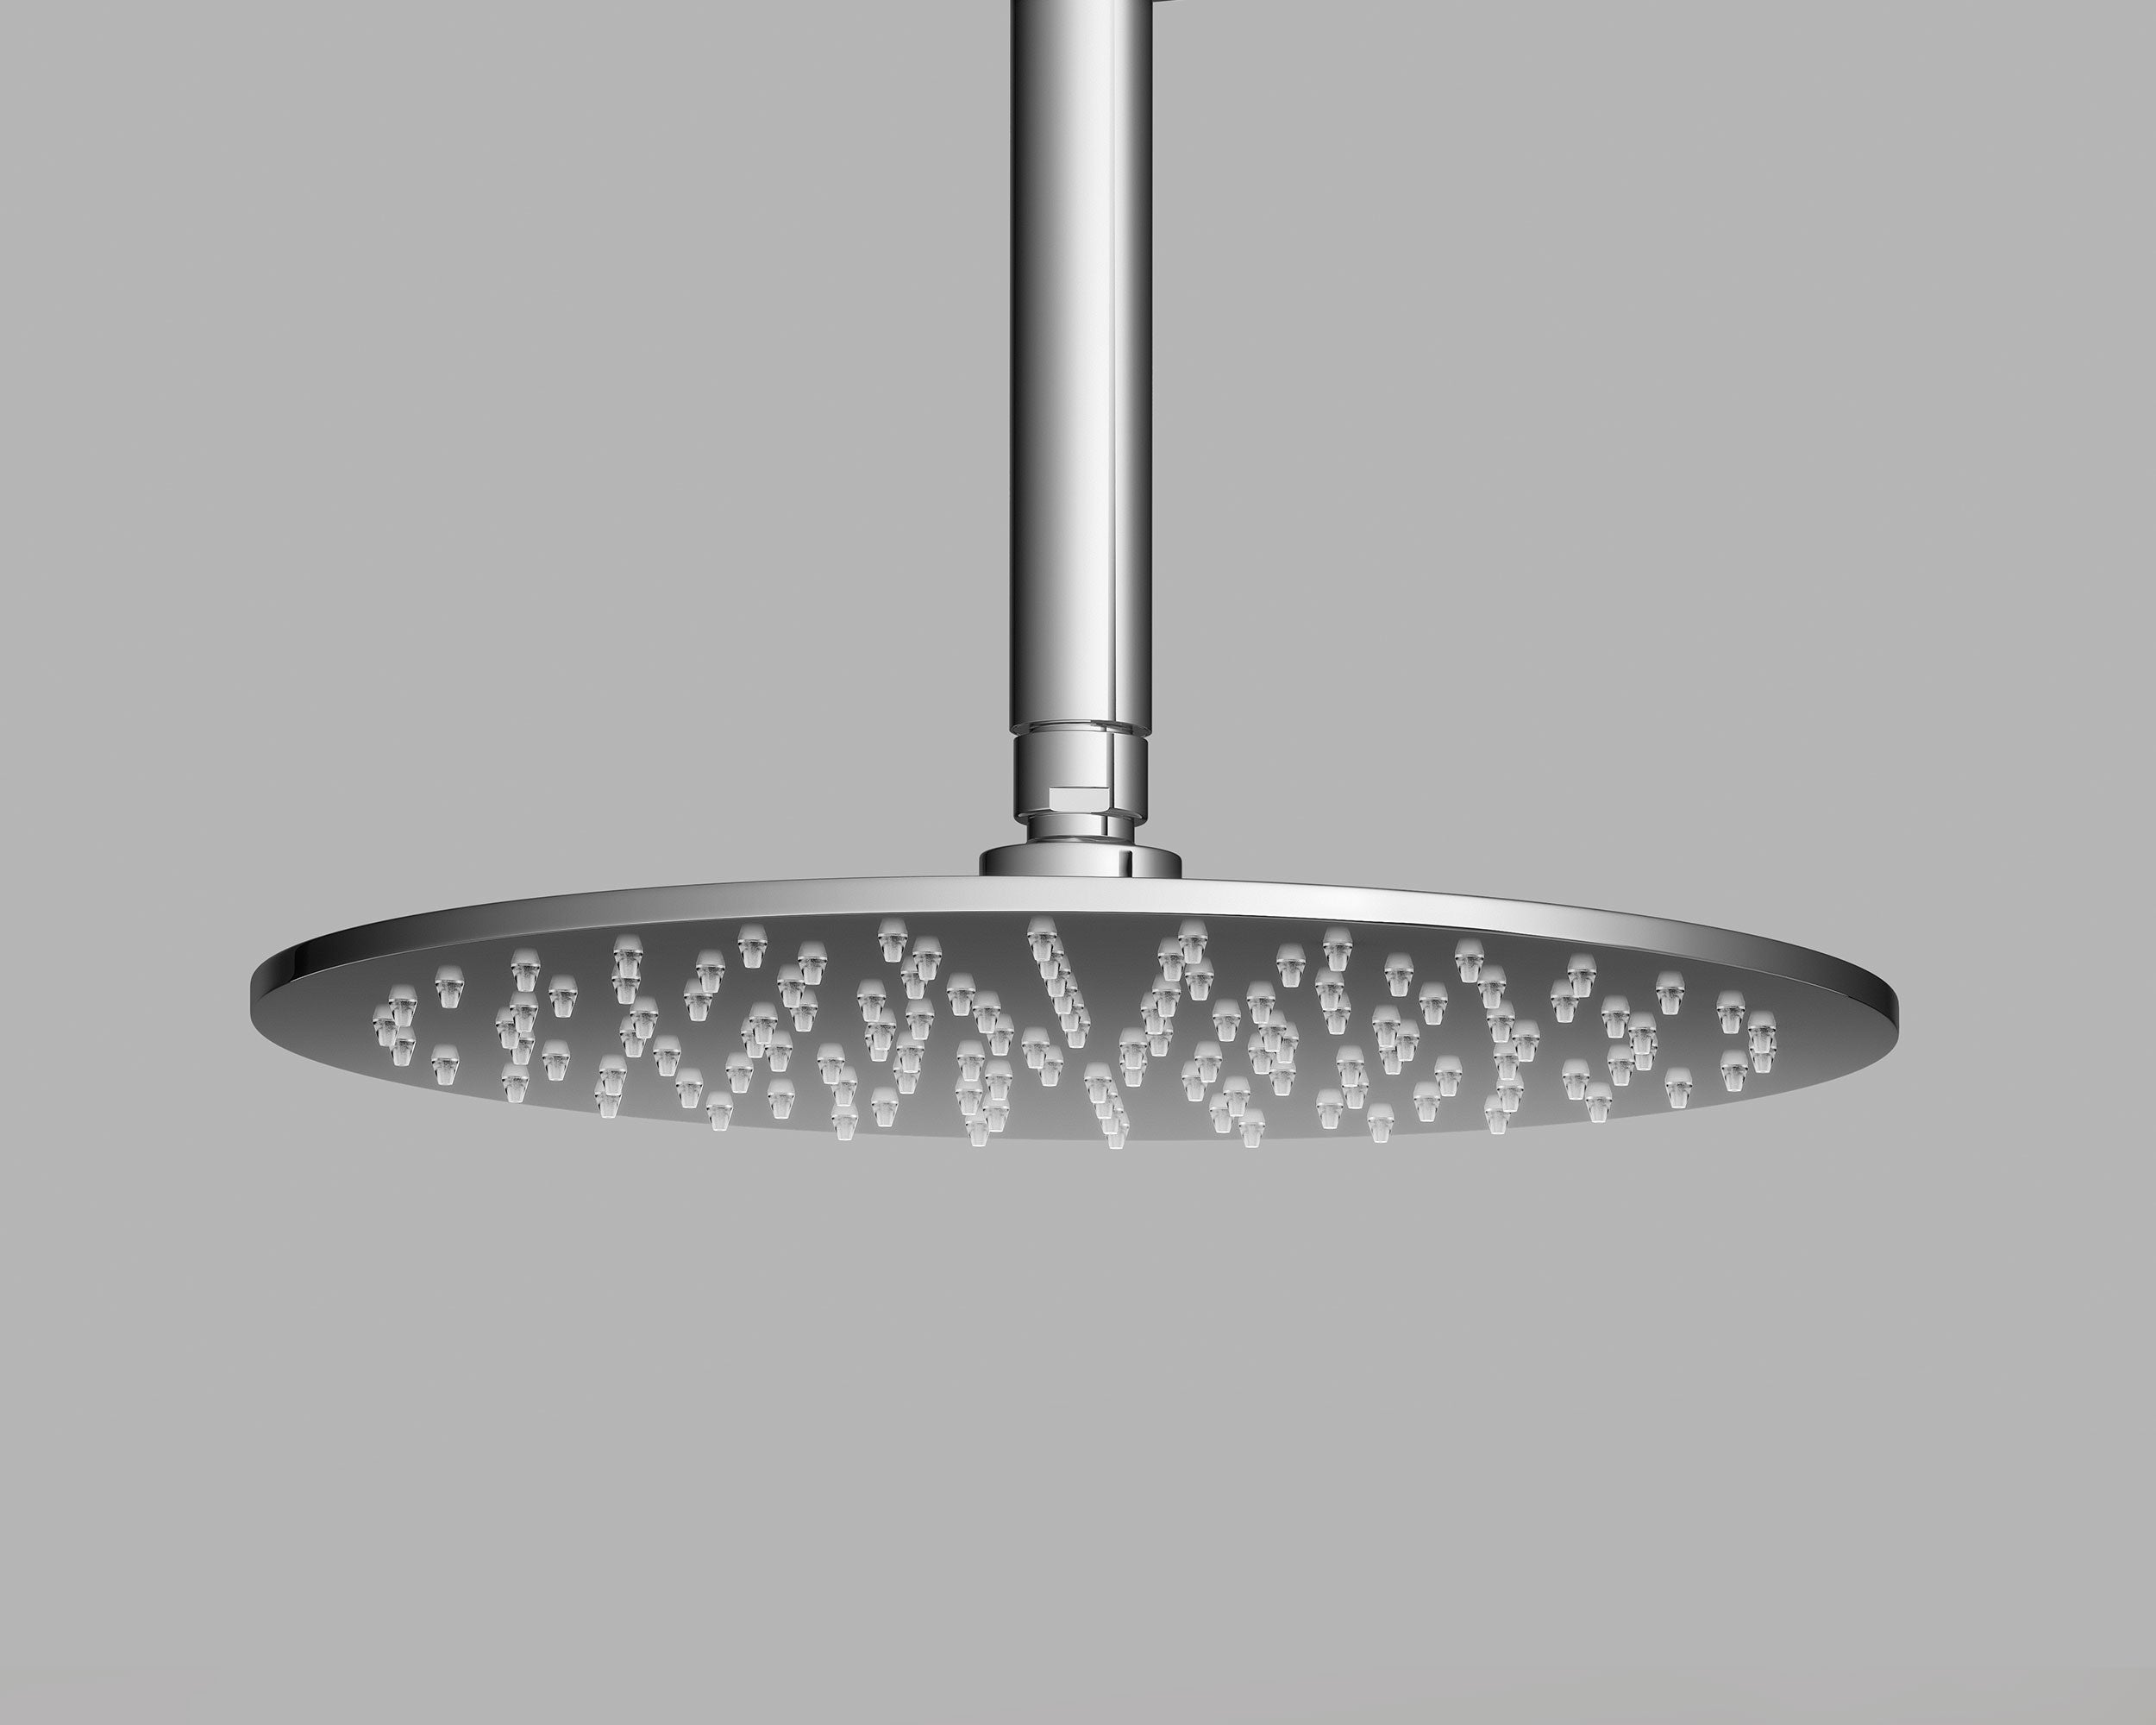 CONCEALED-HEAD-SHOWER-CEILING-MOUNT-SIDEVIEW-Chrome.jpg